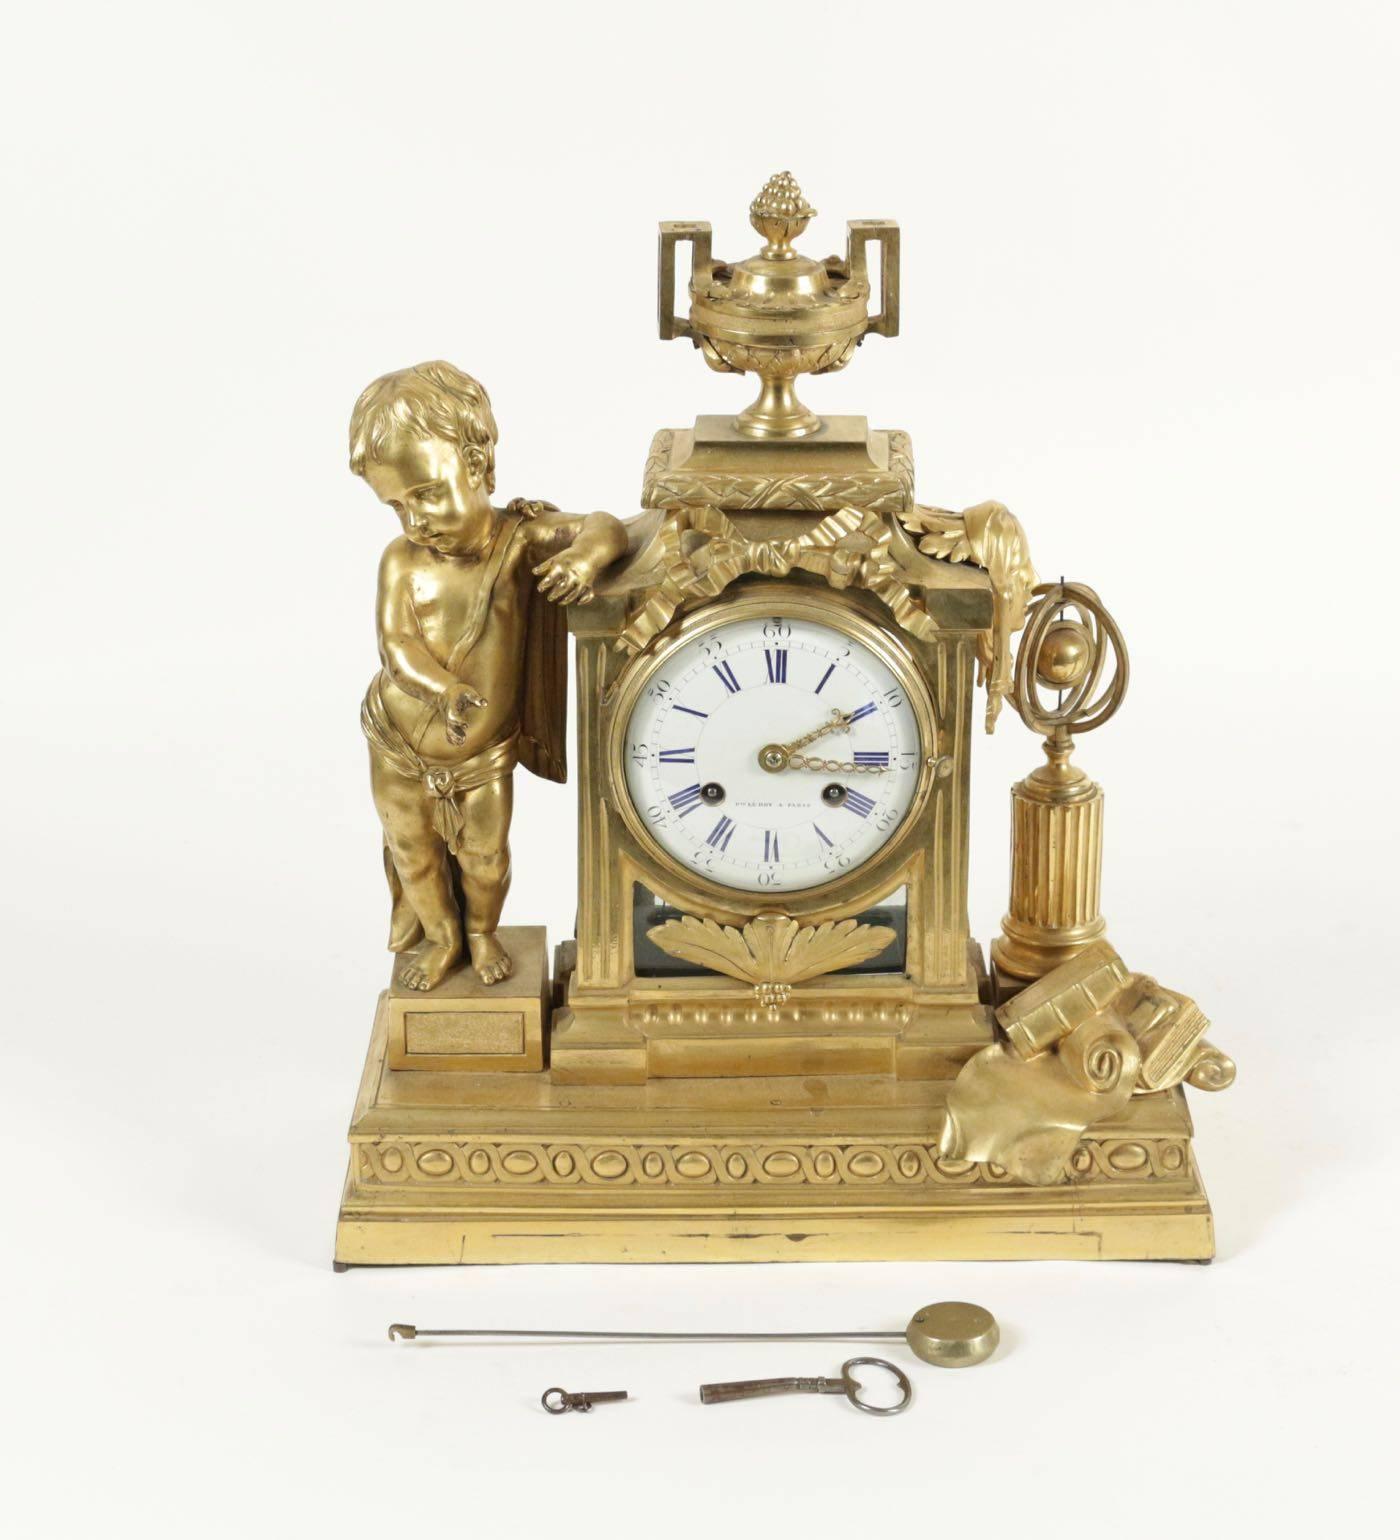 Gold gilt bronze clock from the 18th century. Movement replaced in the 19th century, by Le Roy of Paris.
Measures: H 45cm, L 37cm, P 16cm.
 